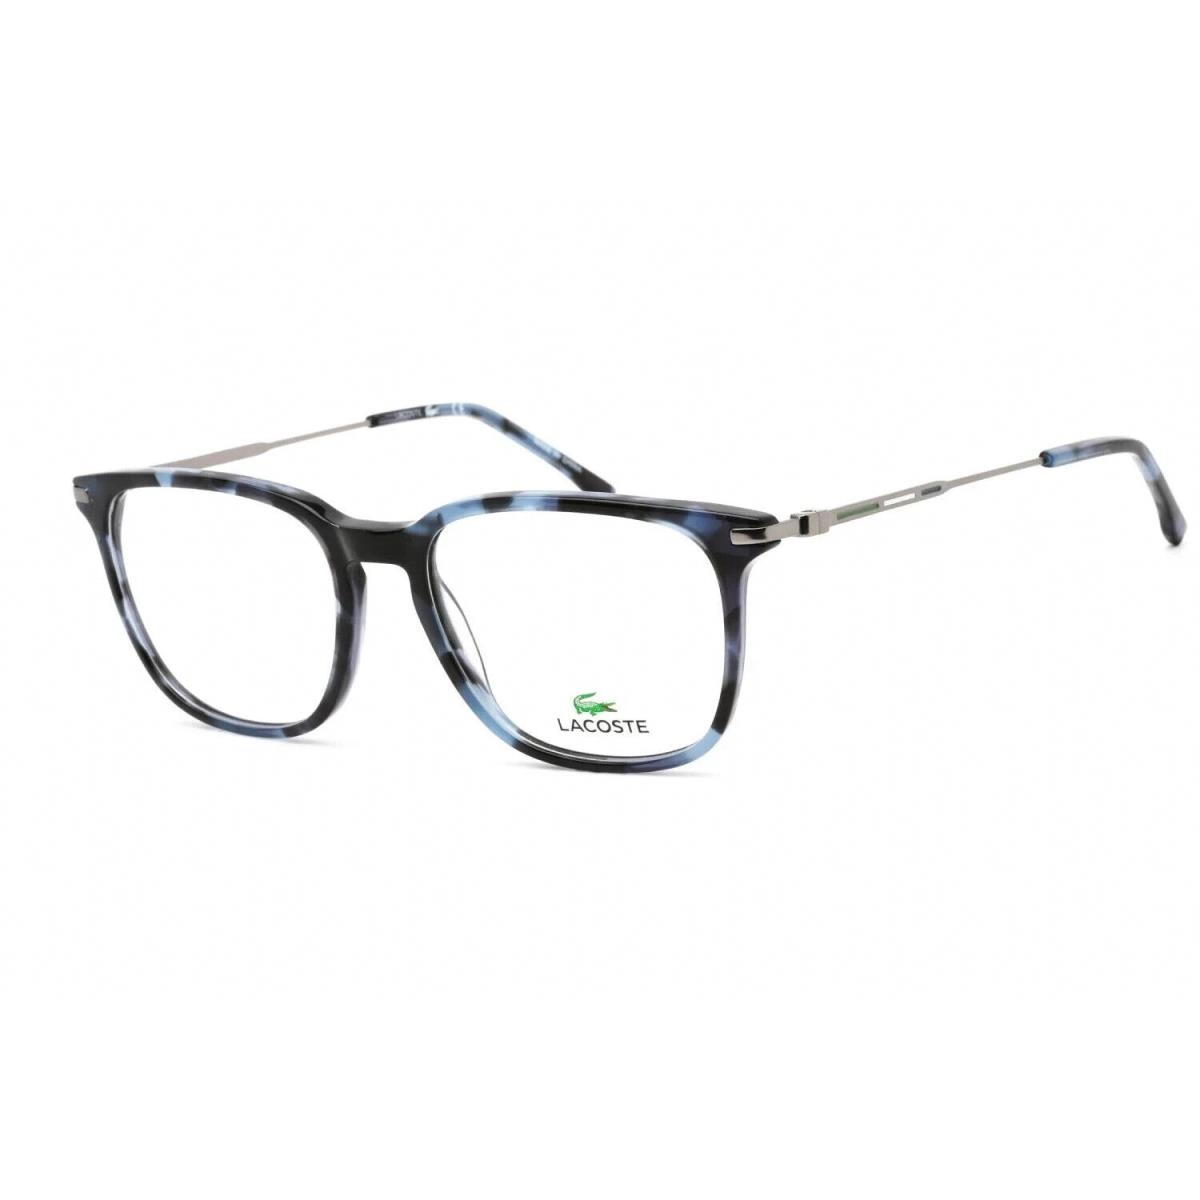 Lacoste L2603 ND 215 54mm Blue Tortoise and Silver Metal Unisex Eyeglasses